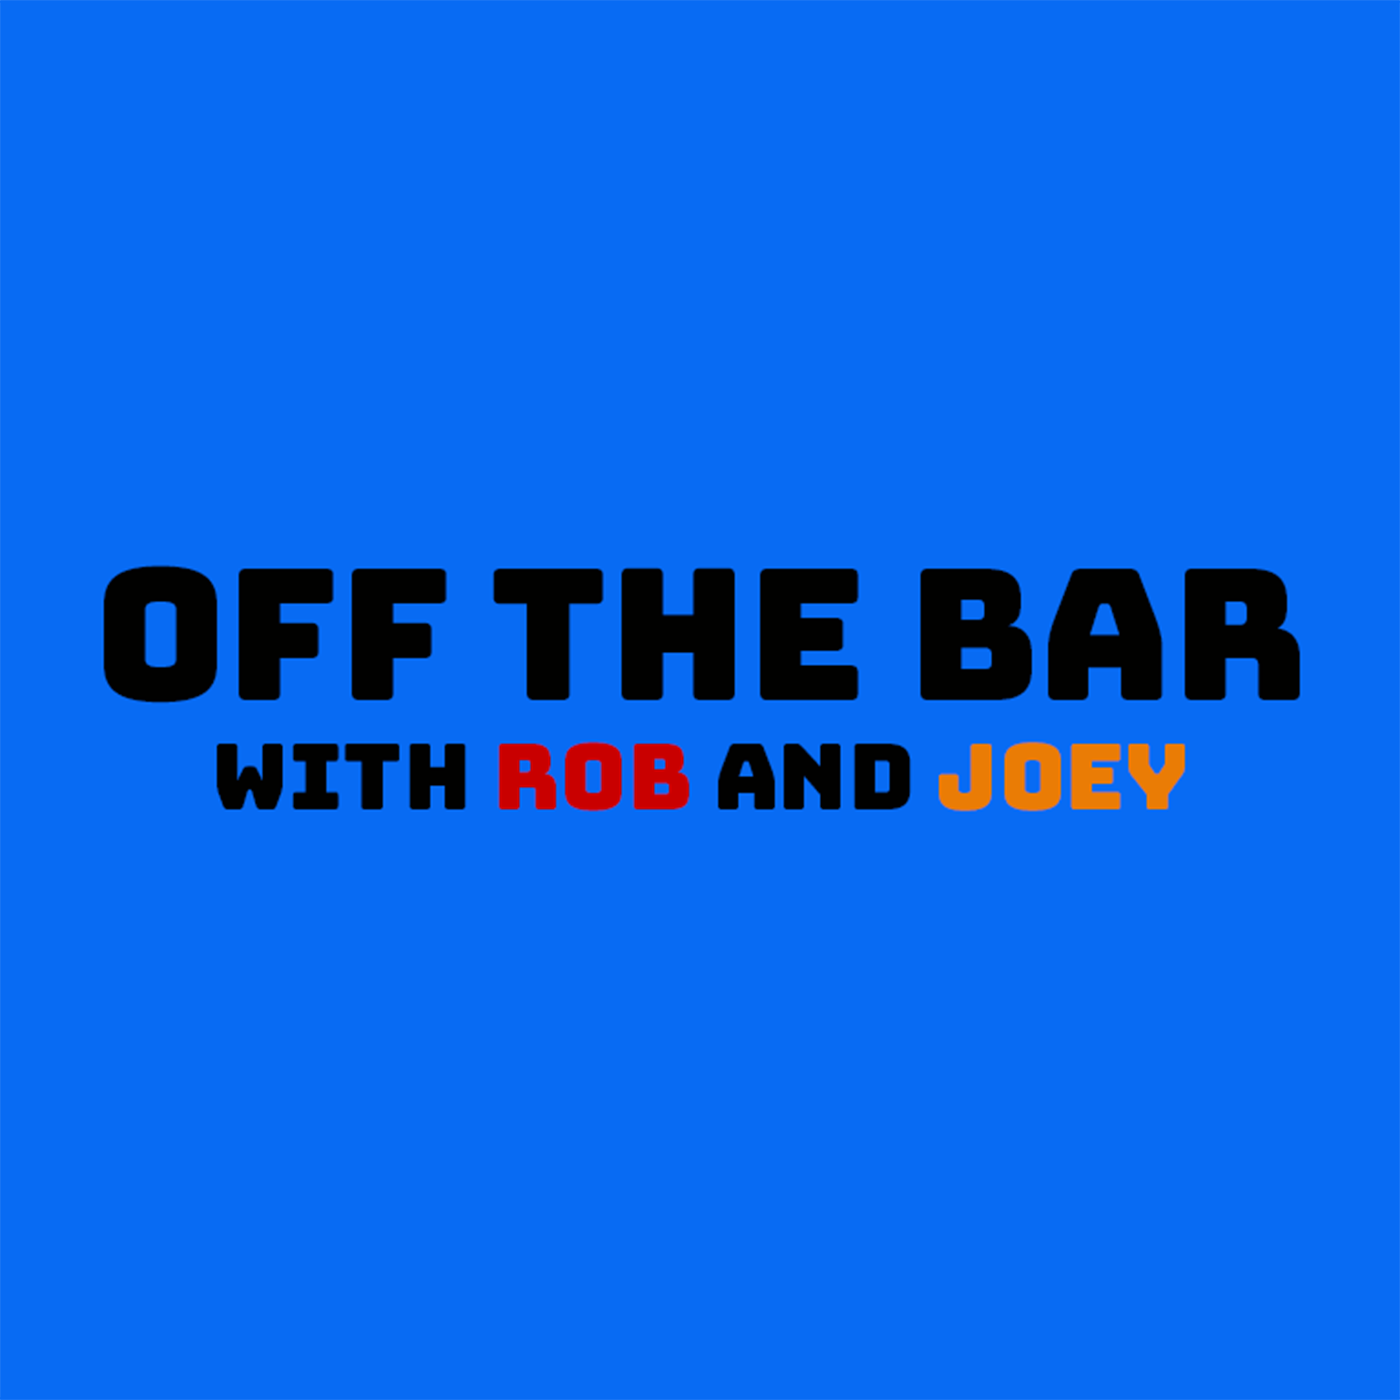 Off the Bar with Rob and Joey